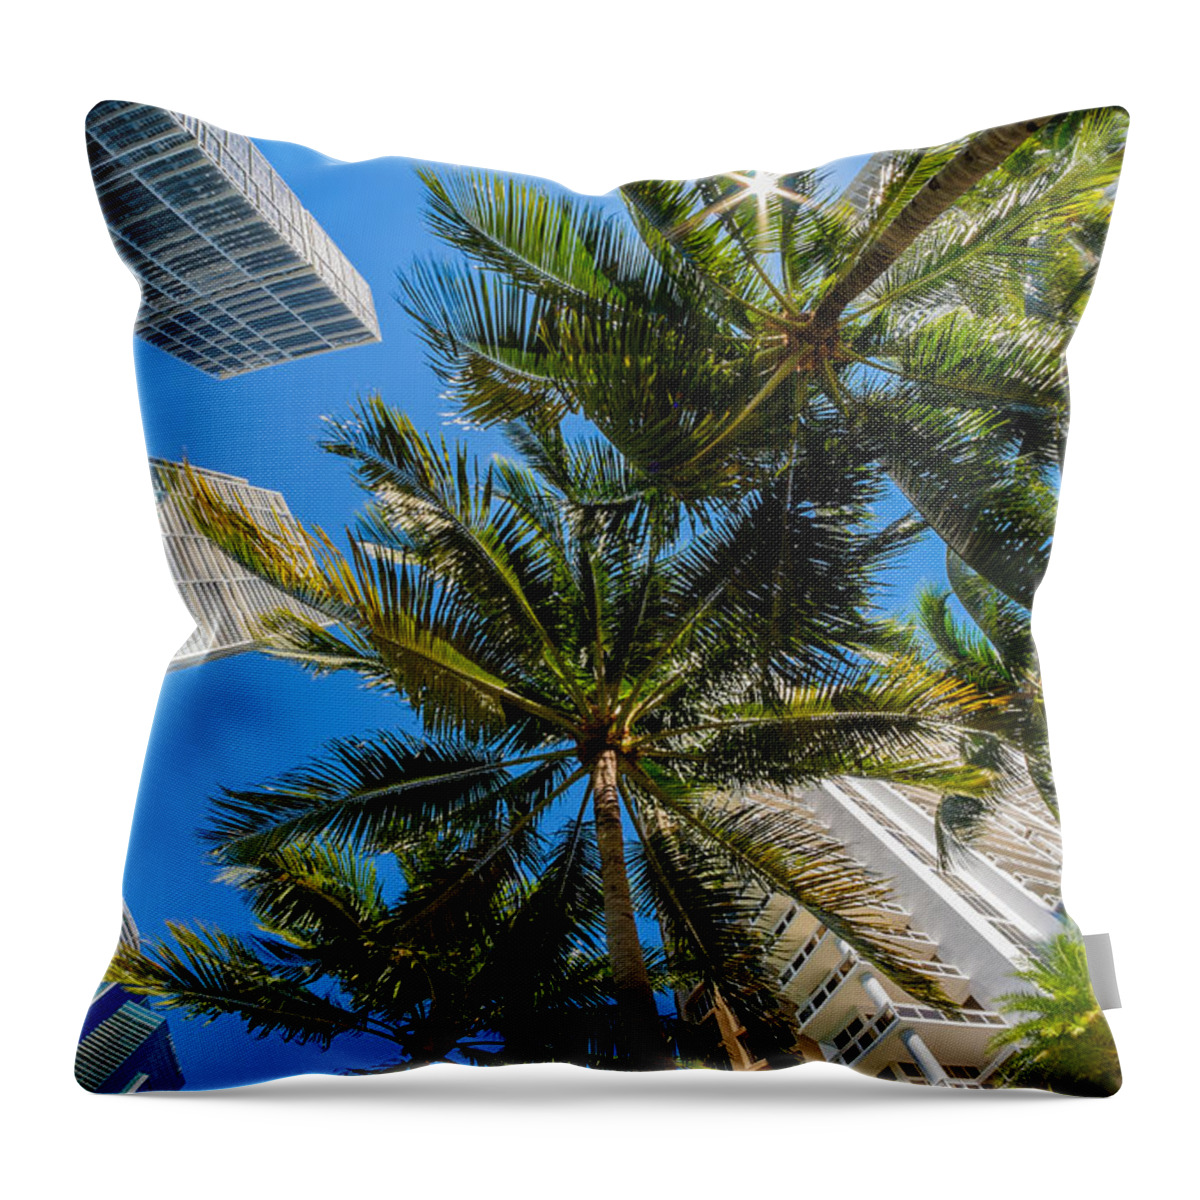 Architecture Throw Pillow featuring the photograph Downtown Miami Brickell Fisheye by Raul Rodriguez